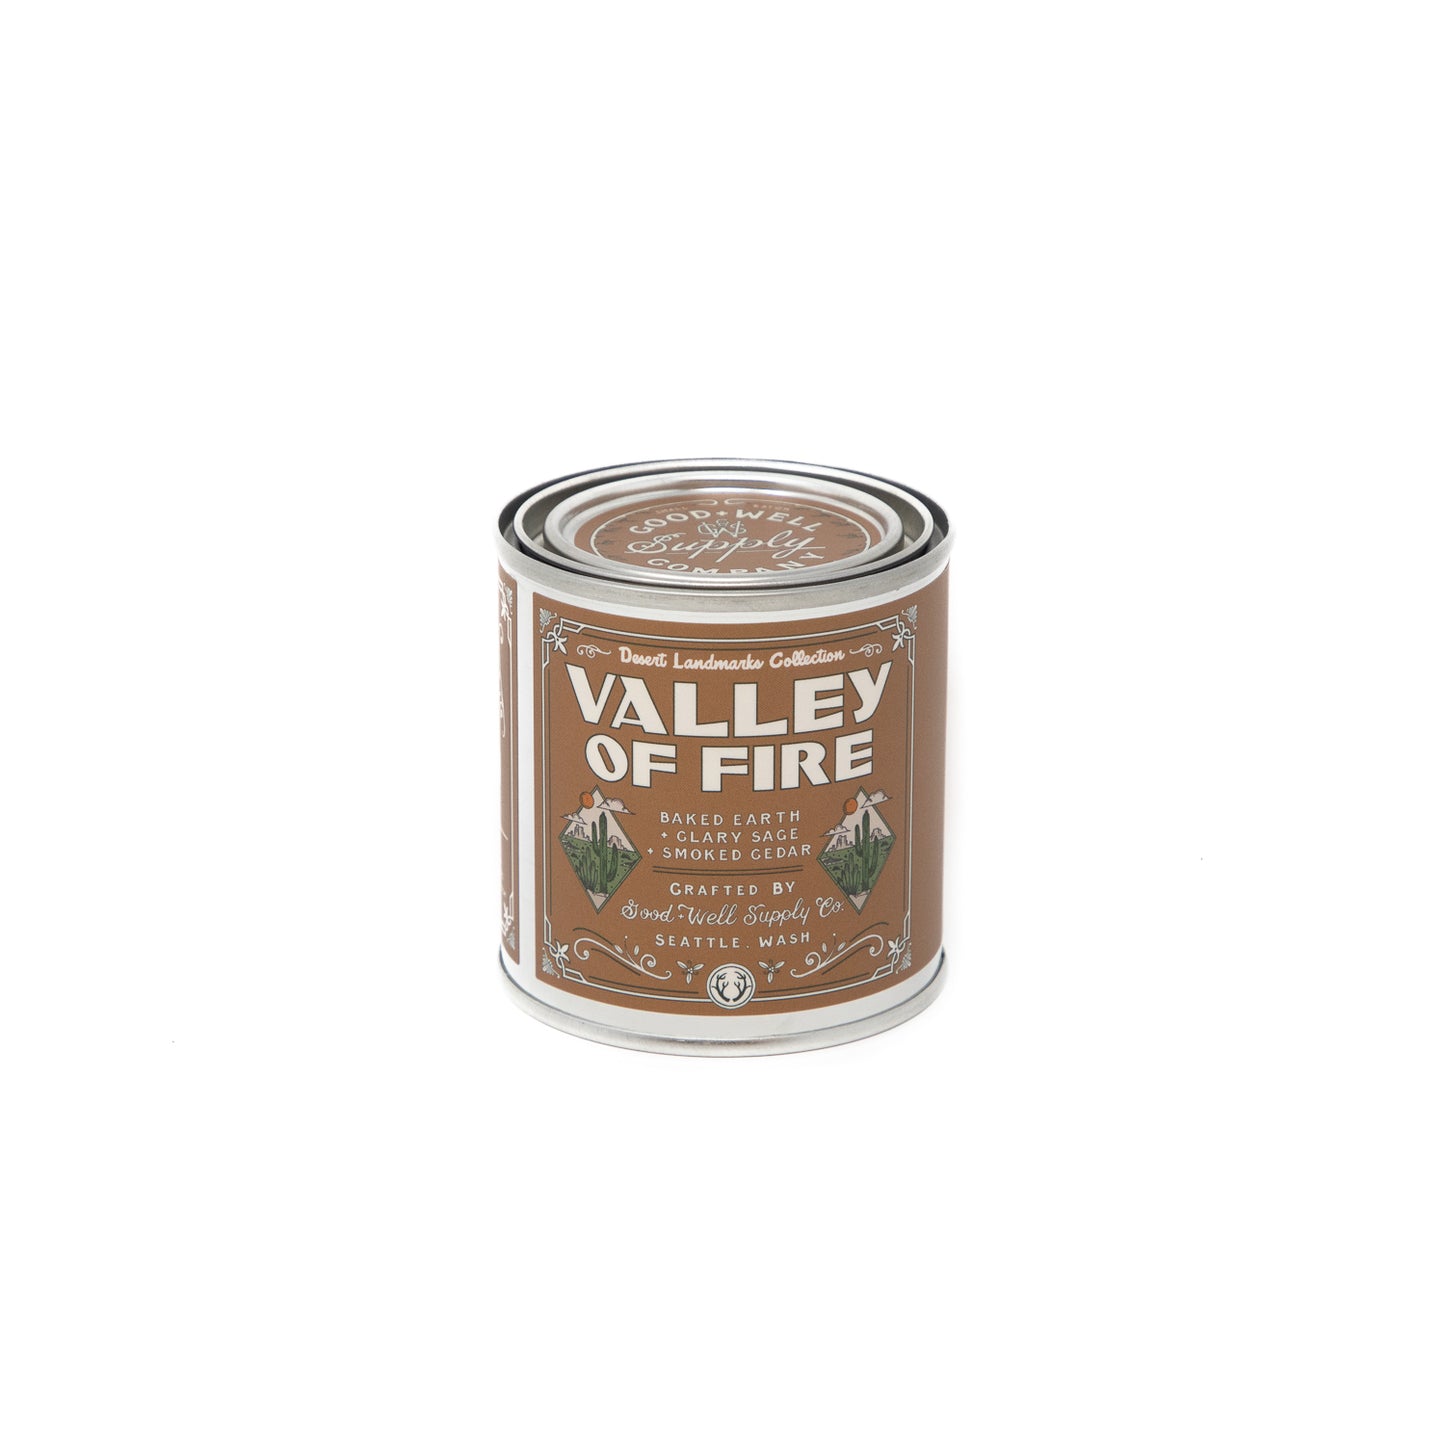 Valley of Fire Desert Landscapes Candle